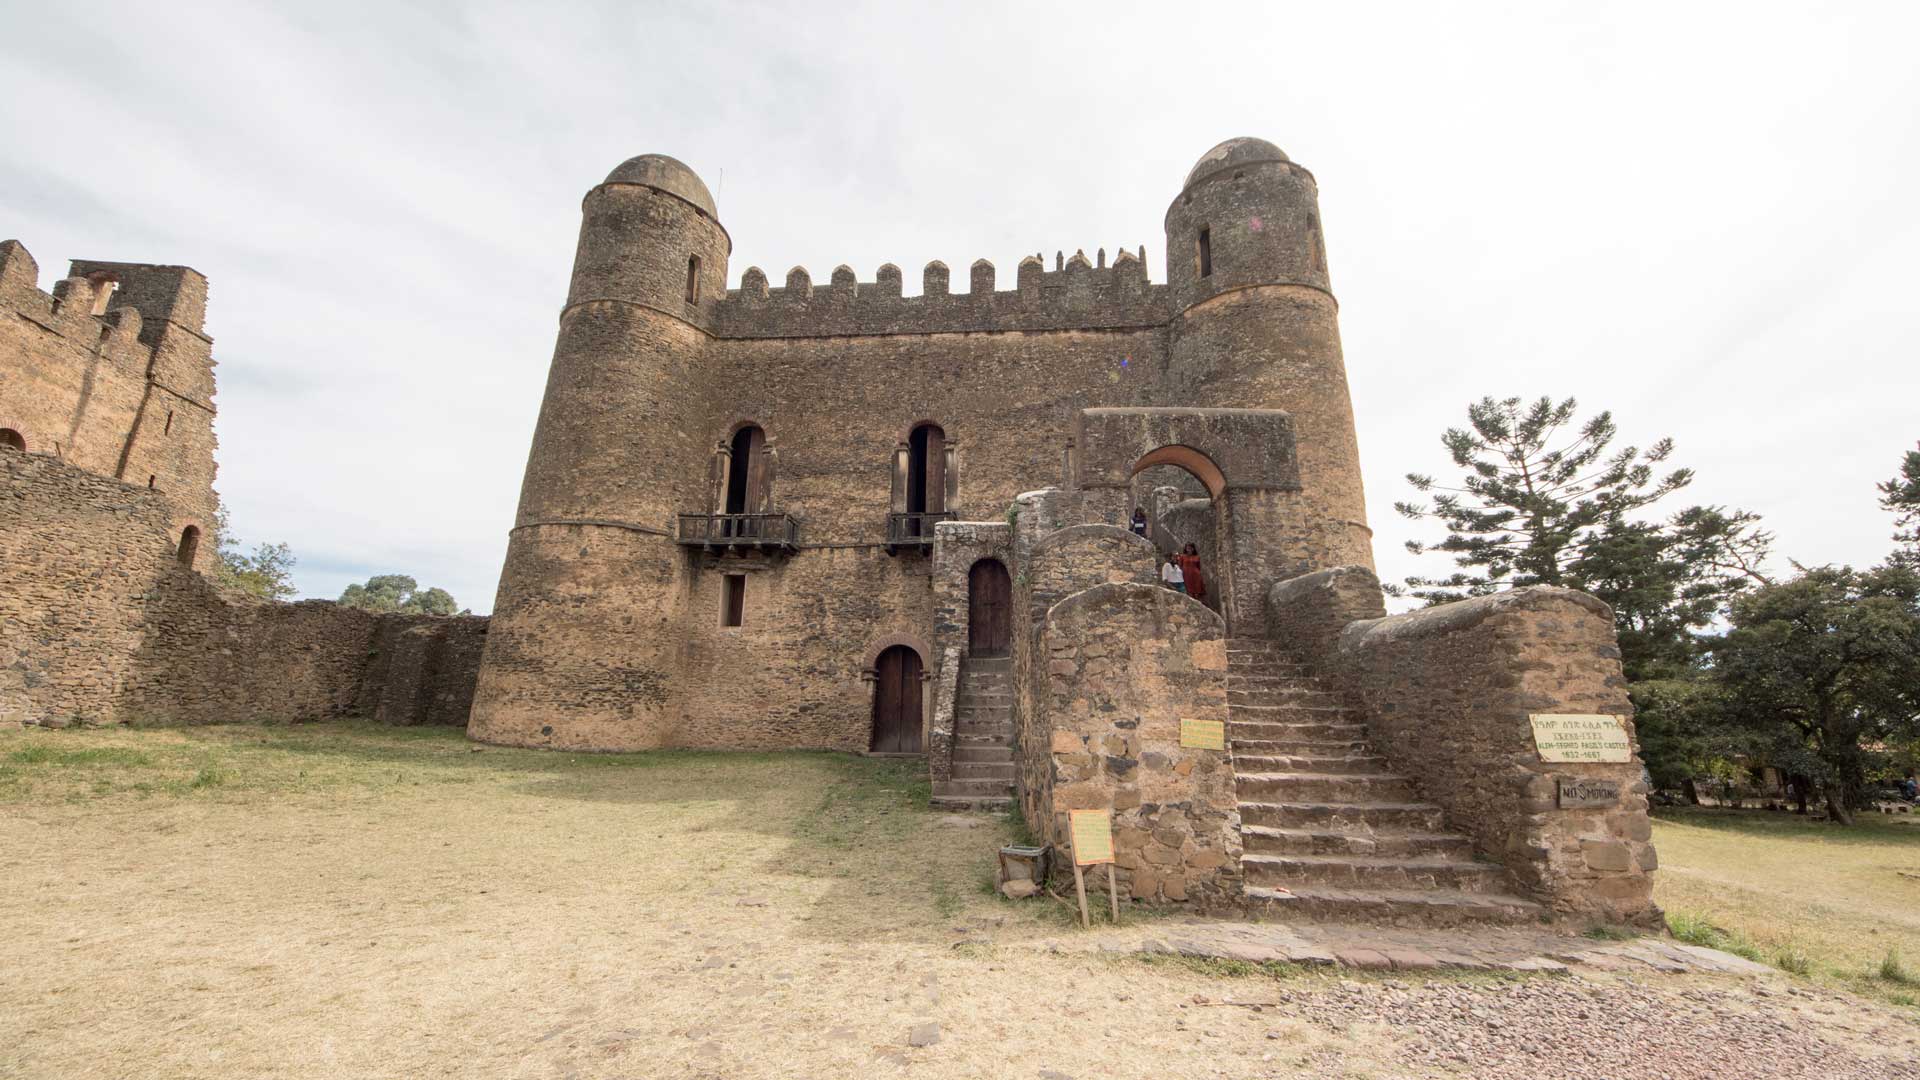 Fasilides Castle, founded by Emperor Fasilides in the 17th century ,Fasil Ghebbi (Royal Enclosure), Gondar, Ethiopia